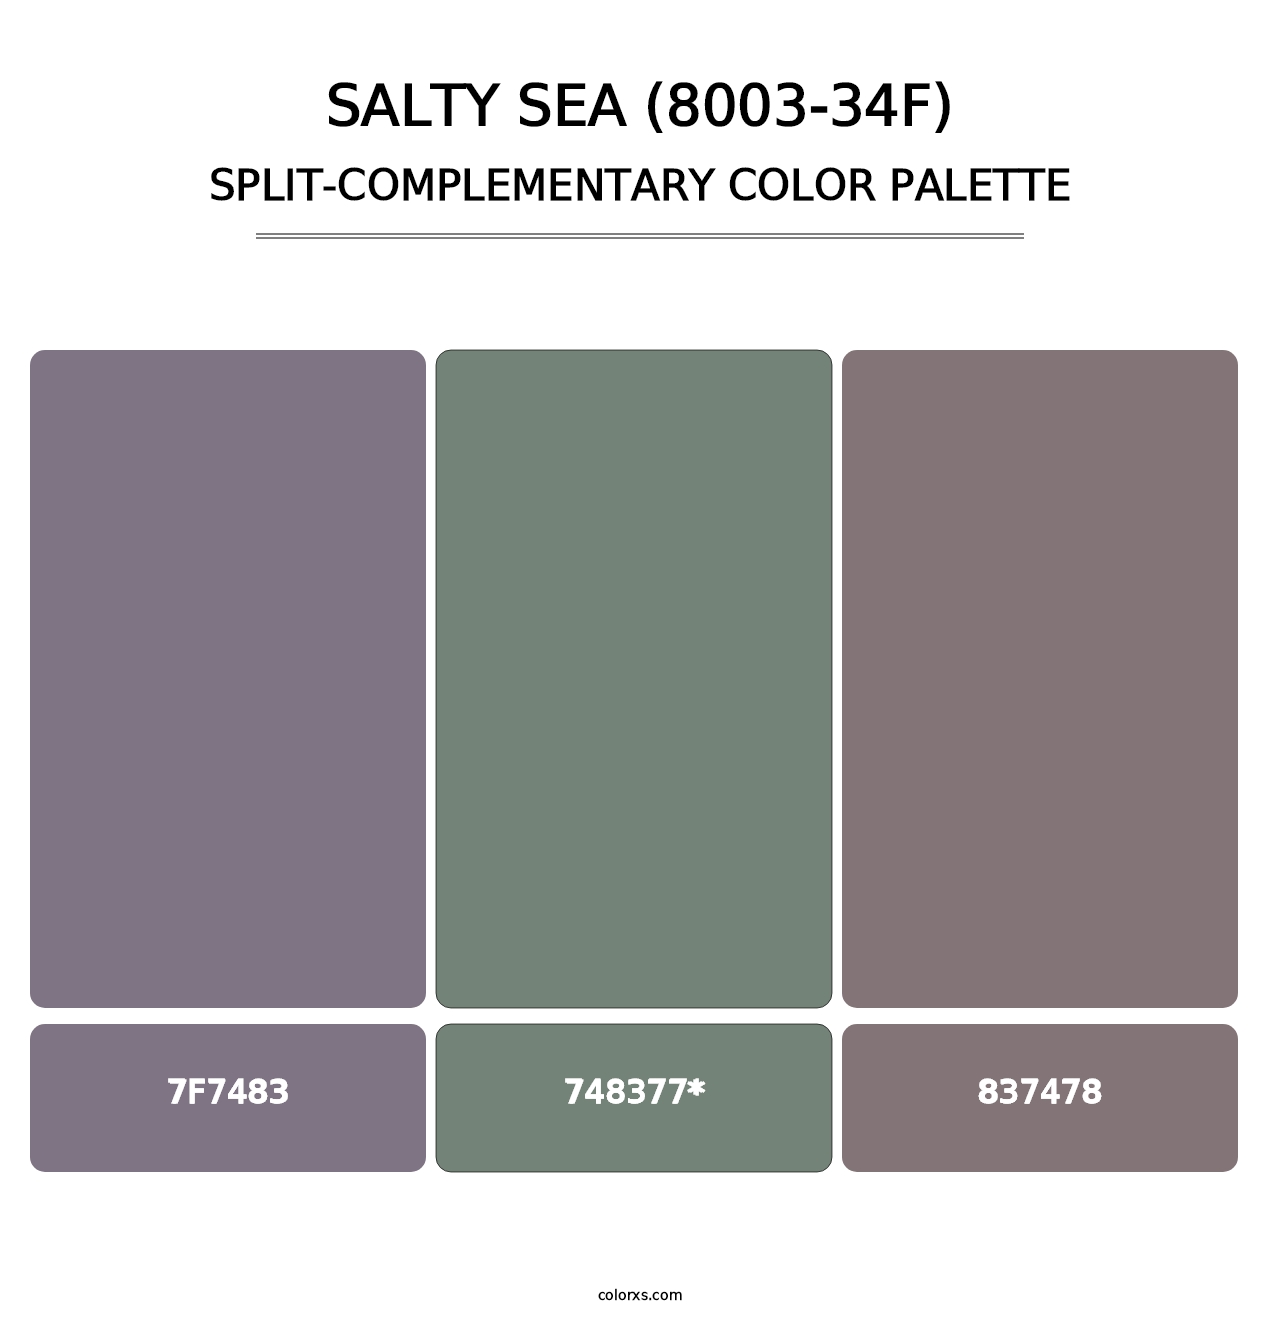 Salty Sea (8003-34F) - Split-Complementary Color Palette